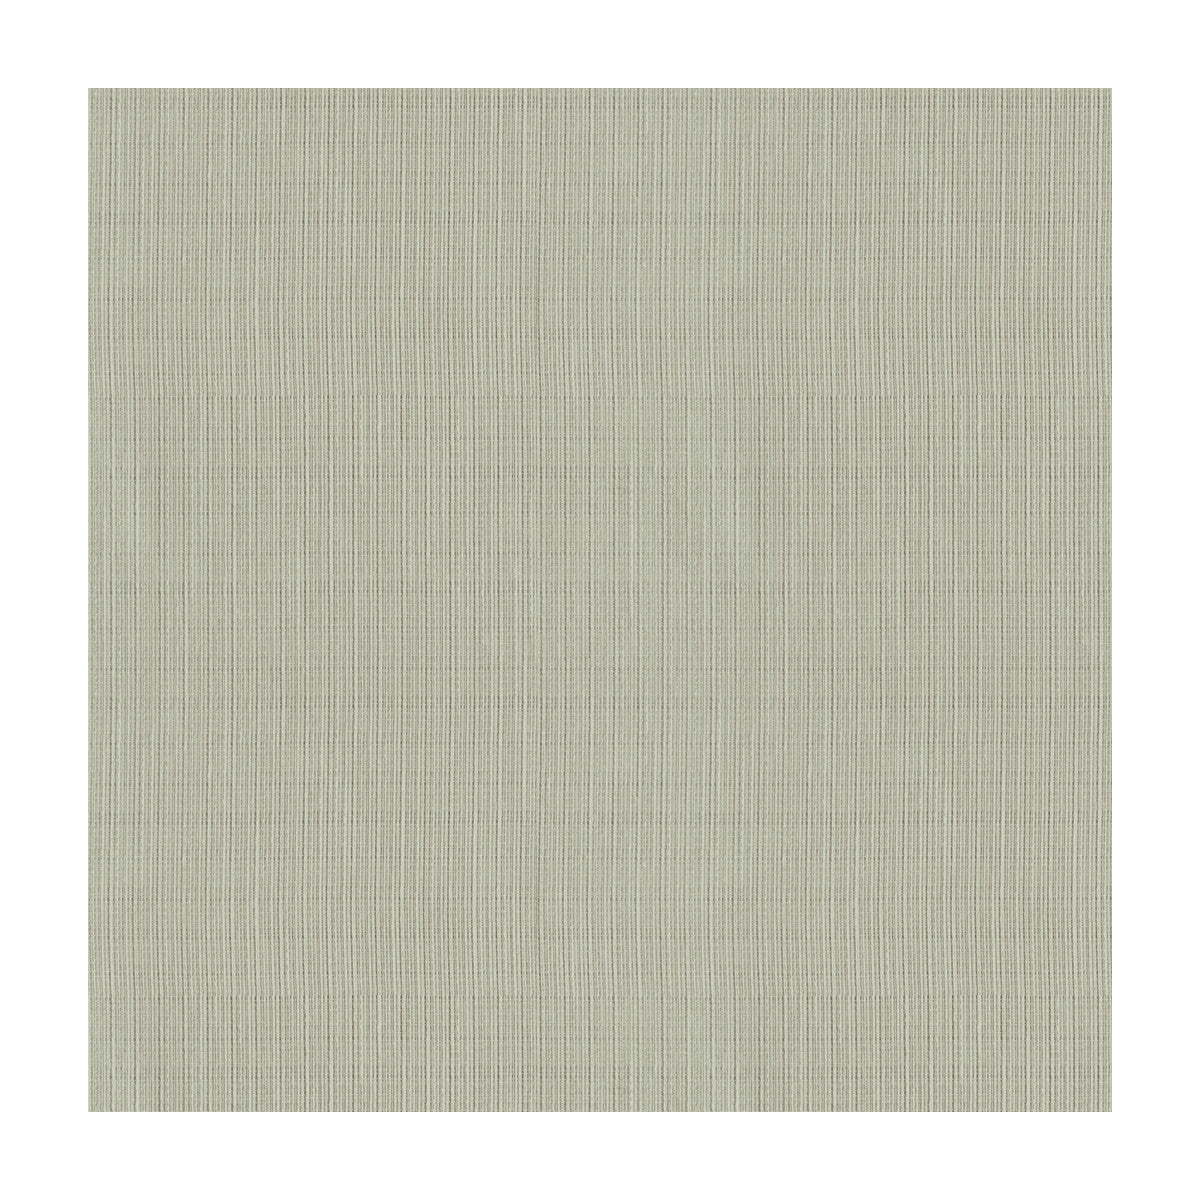 Kravet Contract fabric in 4158-11 color - pattern 4158.11.0 - by Kravet Contract